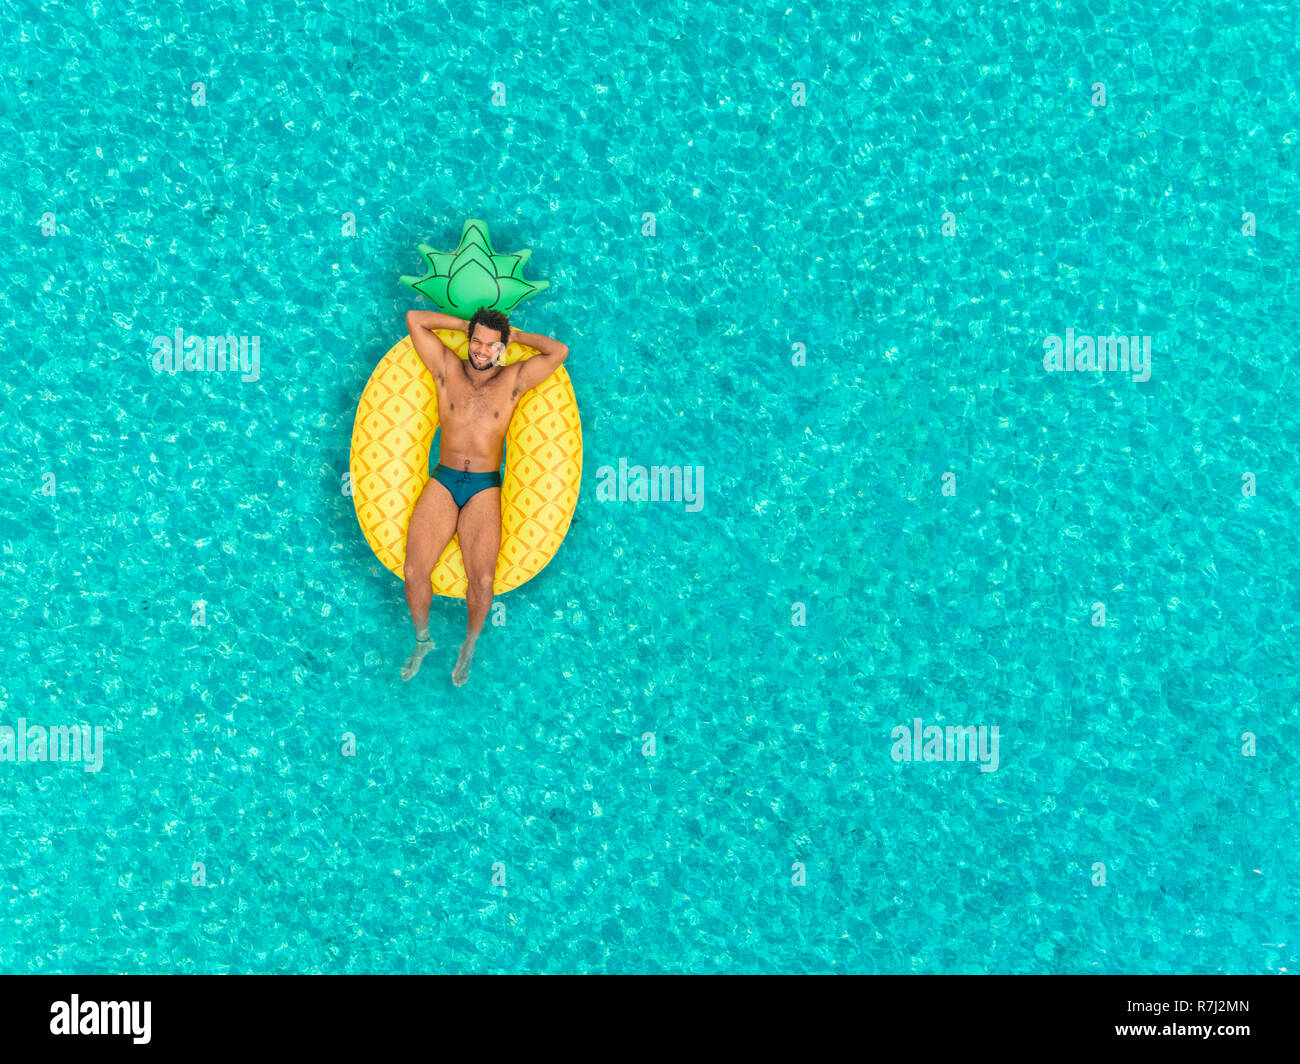 Aerial view of man floating on inflatable pineapple shaped mattress, smiling. Stock Photo